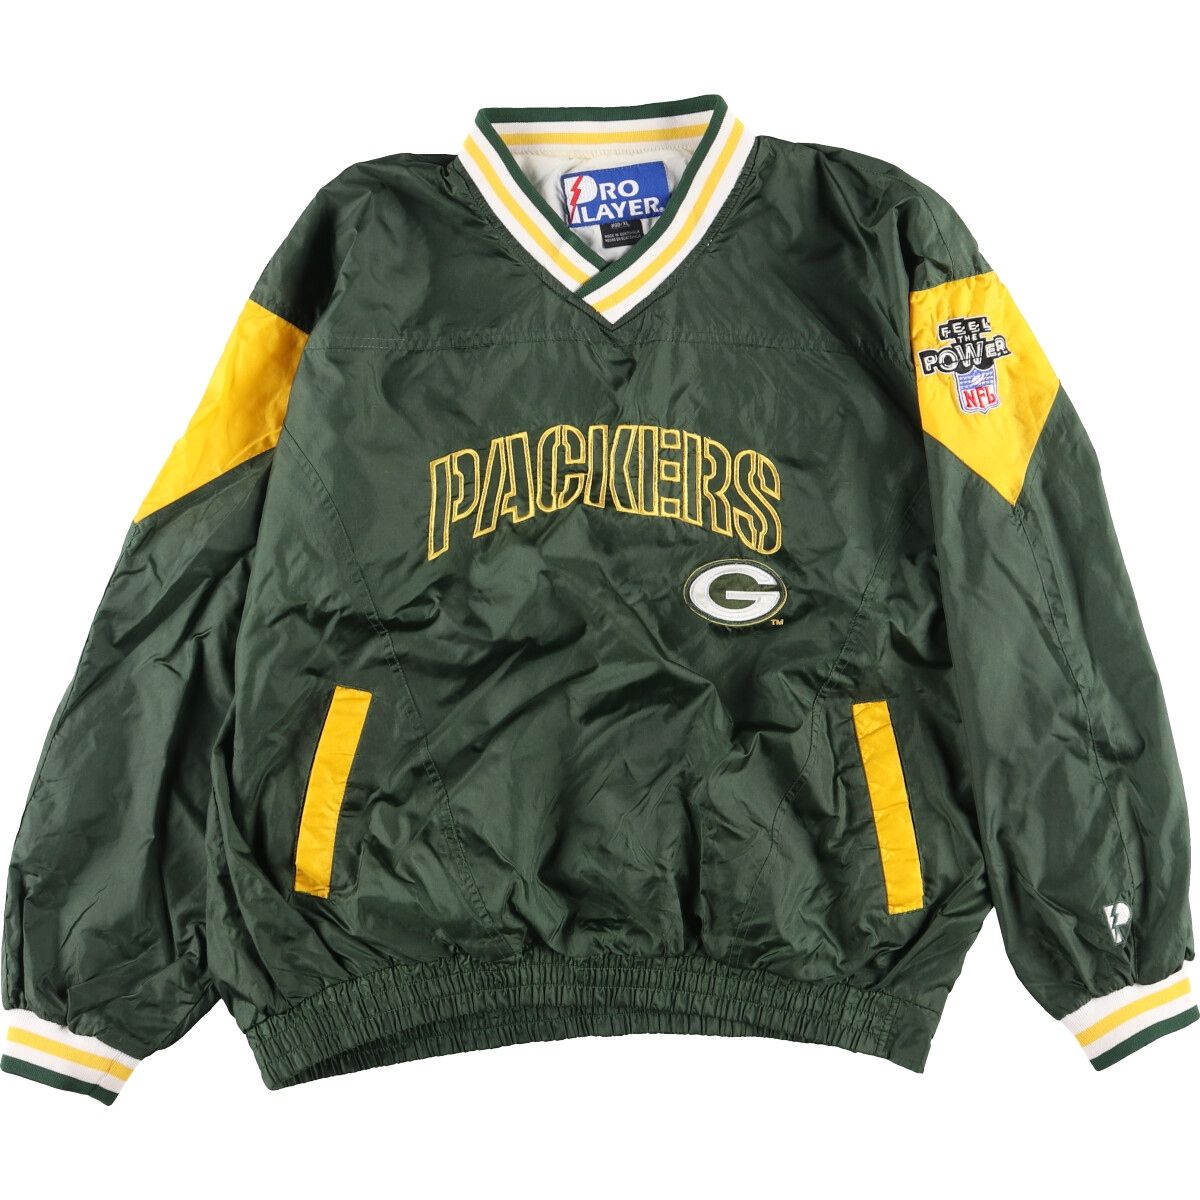 PRO PLAYER NFL GREEN BAY PACKERS グリーンベイパッカーズ Vネック